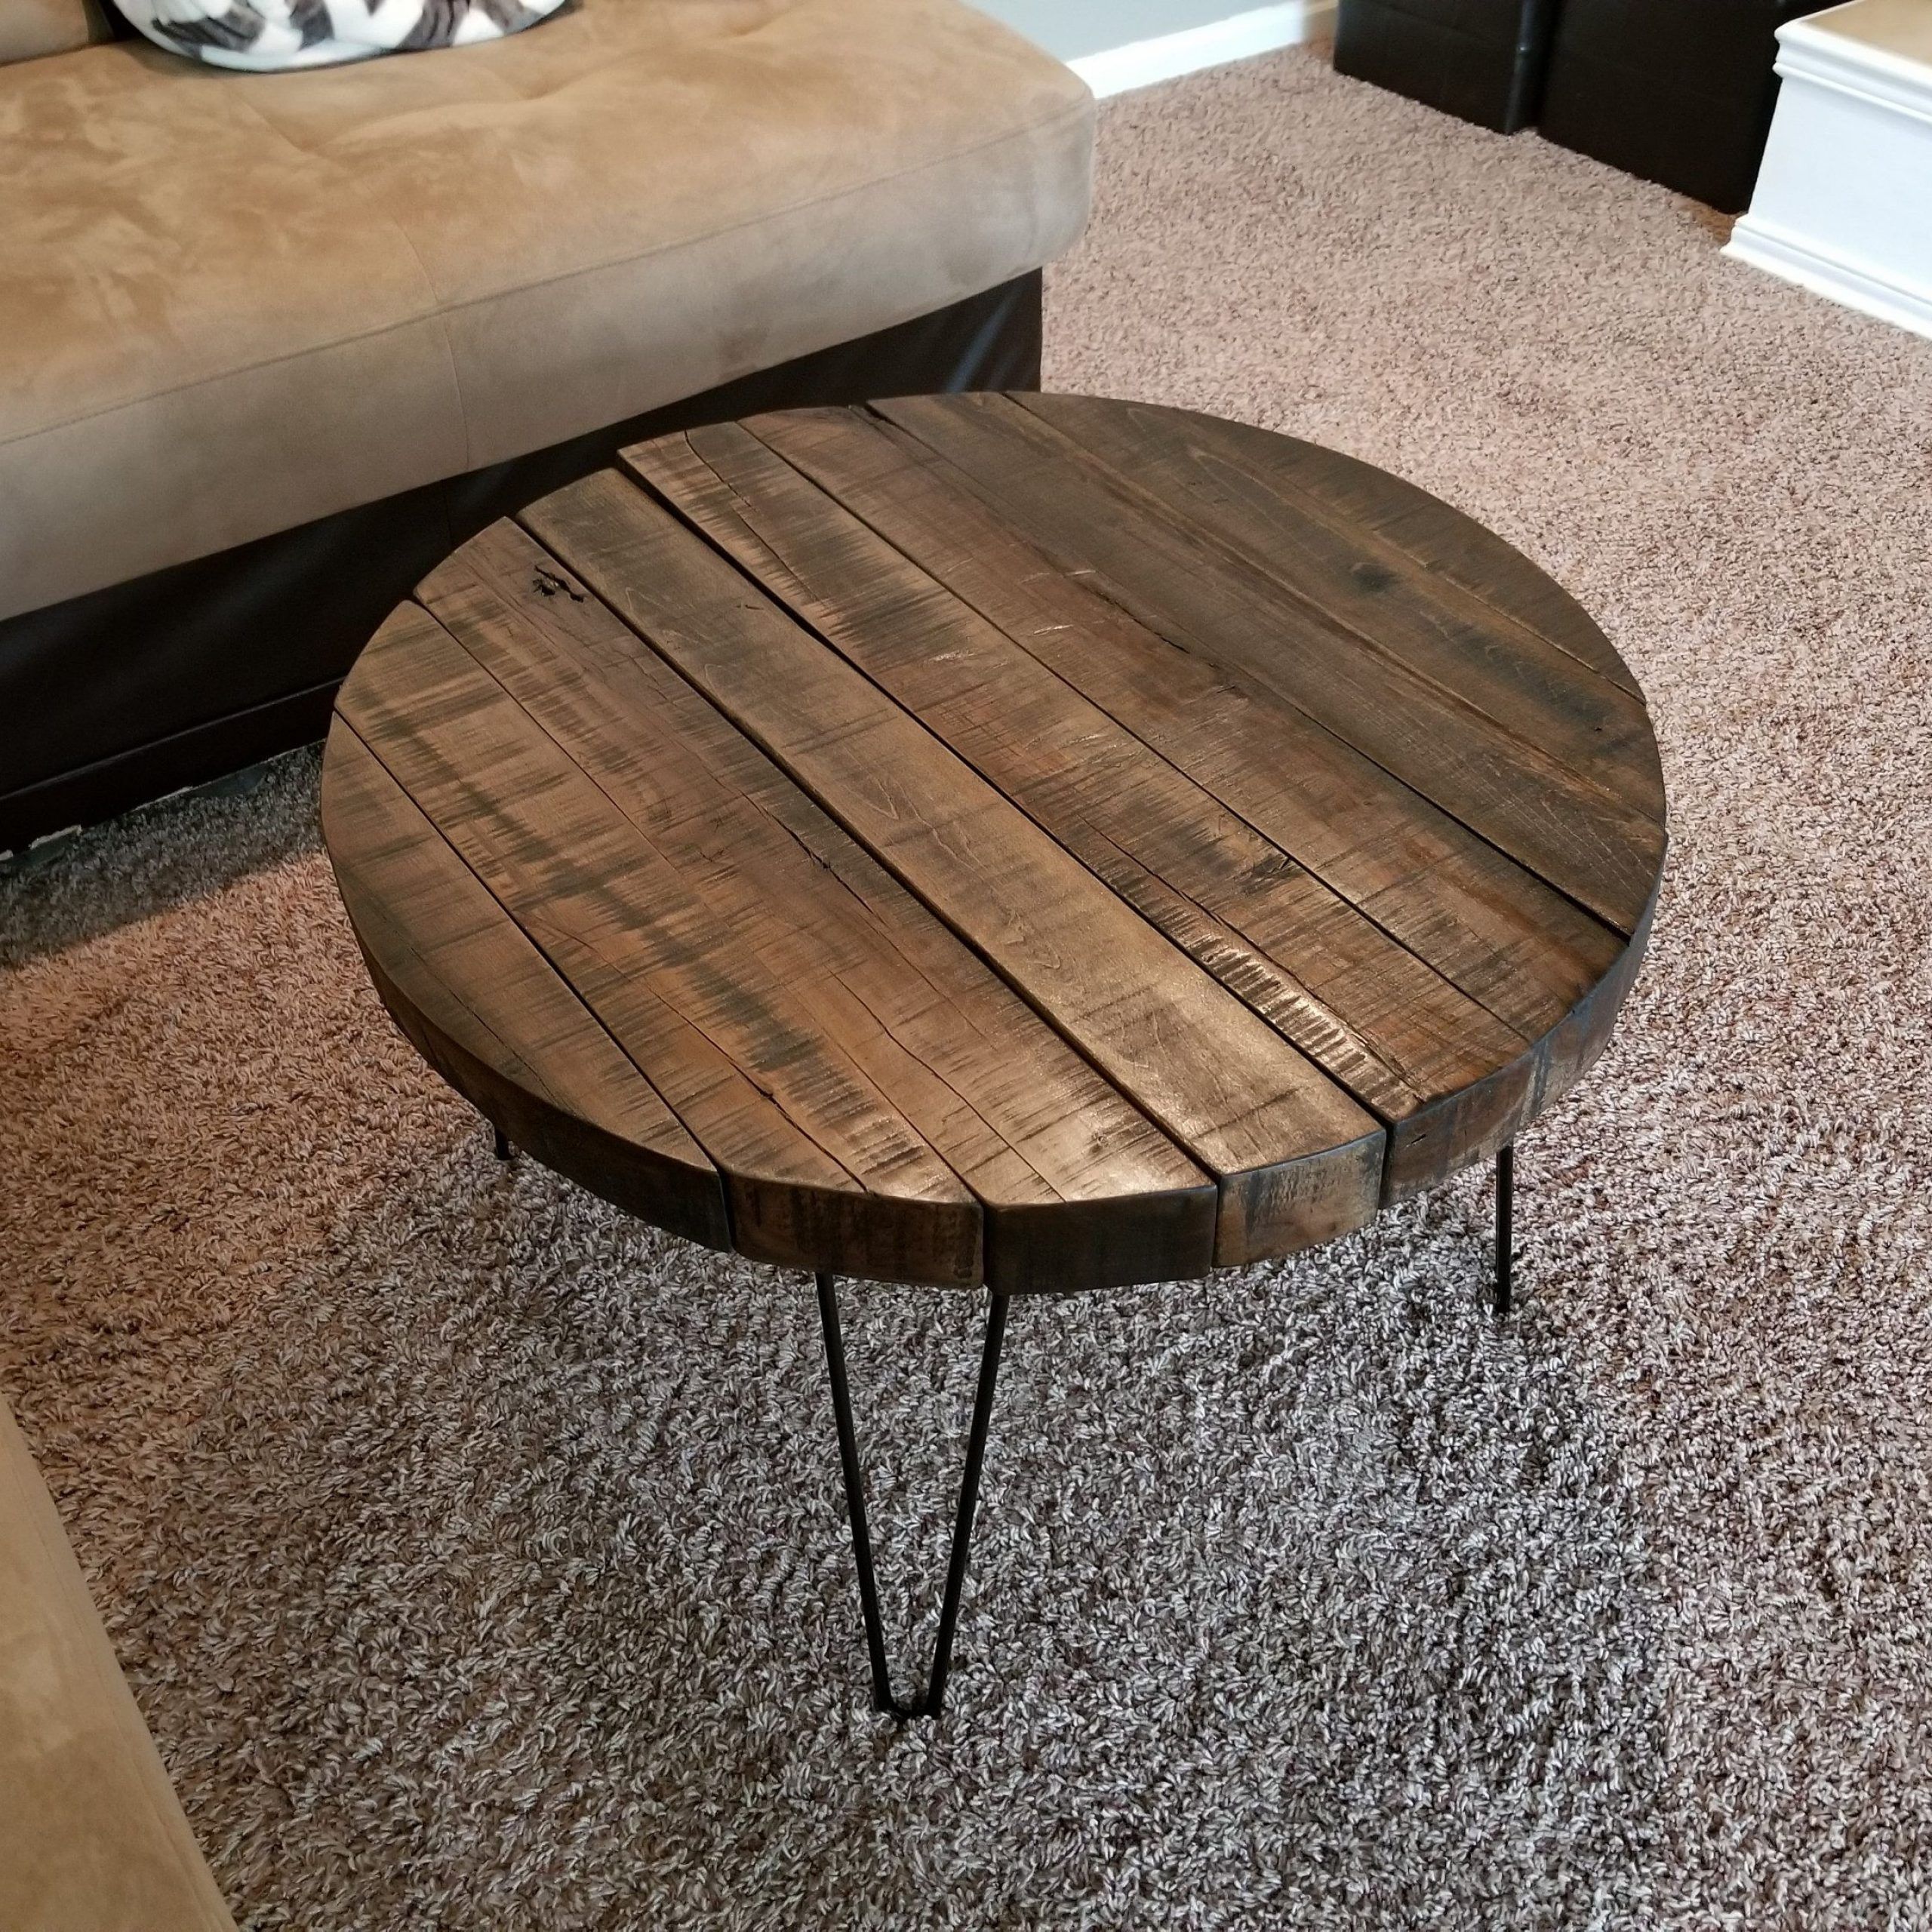 Reclaimed Wood Round Coffee Table With Hairpin Legs For Popular Round Hairpin Leg Dining Tables (View 12 of 20)